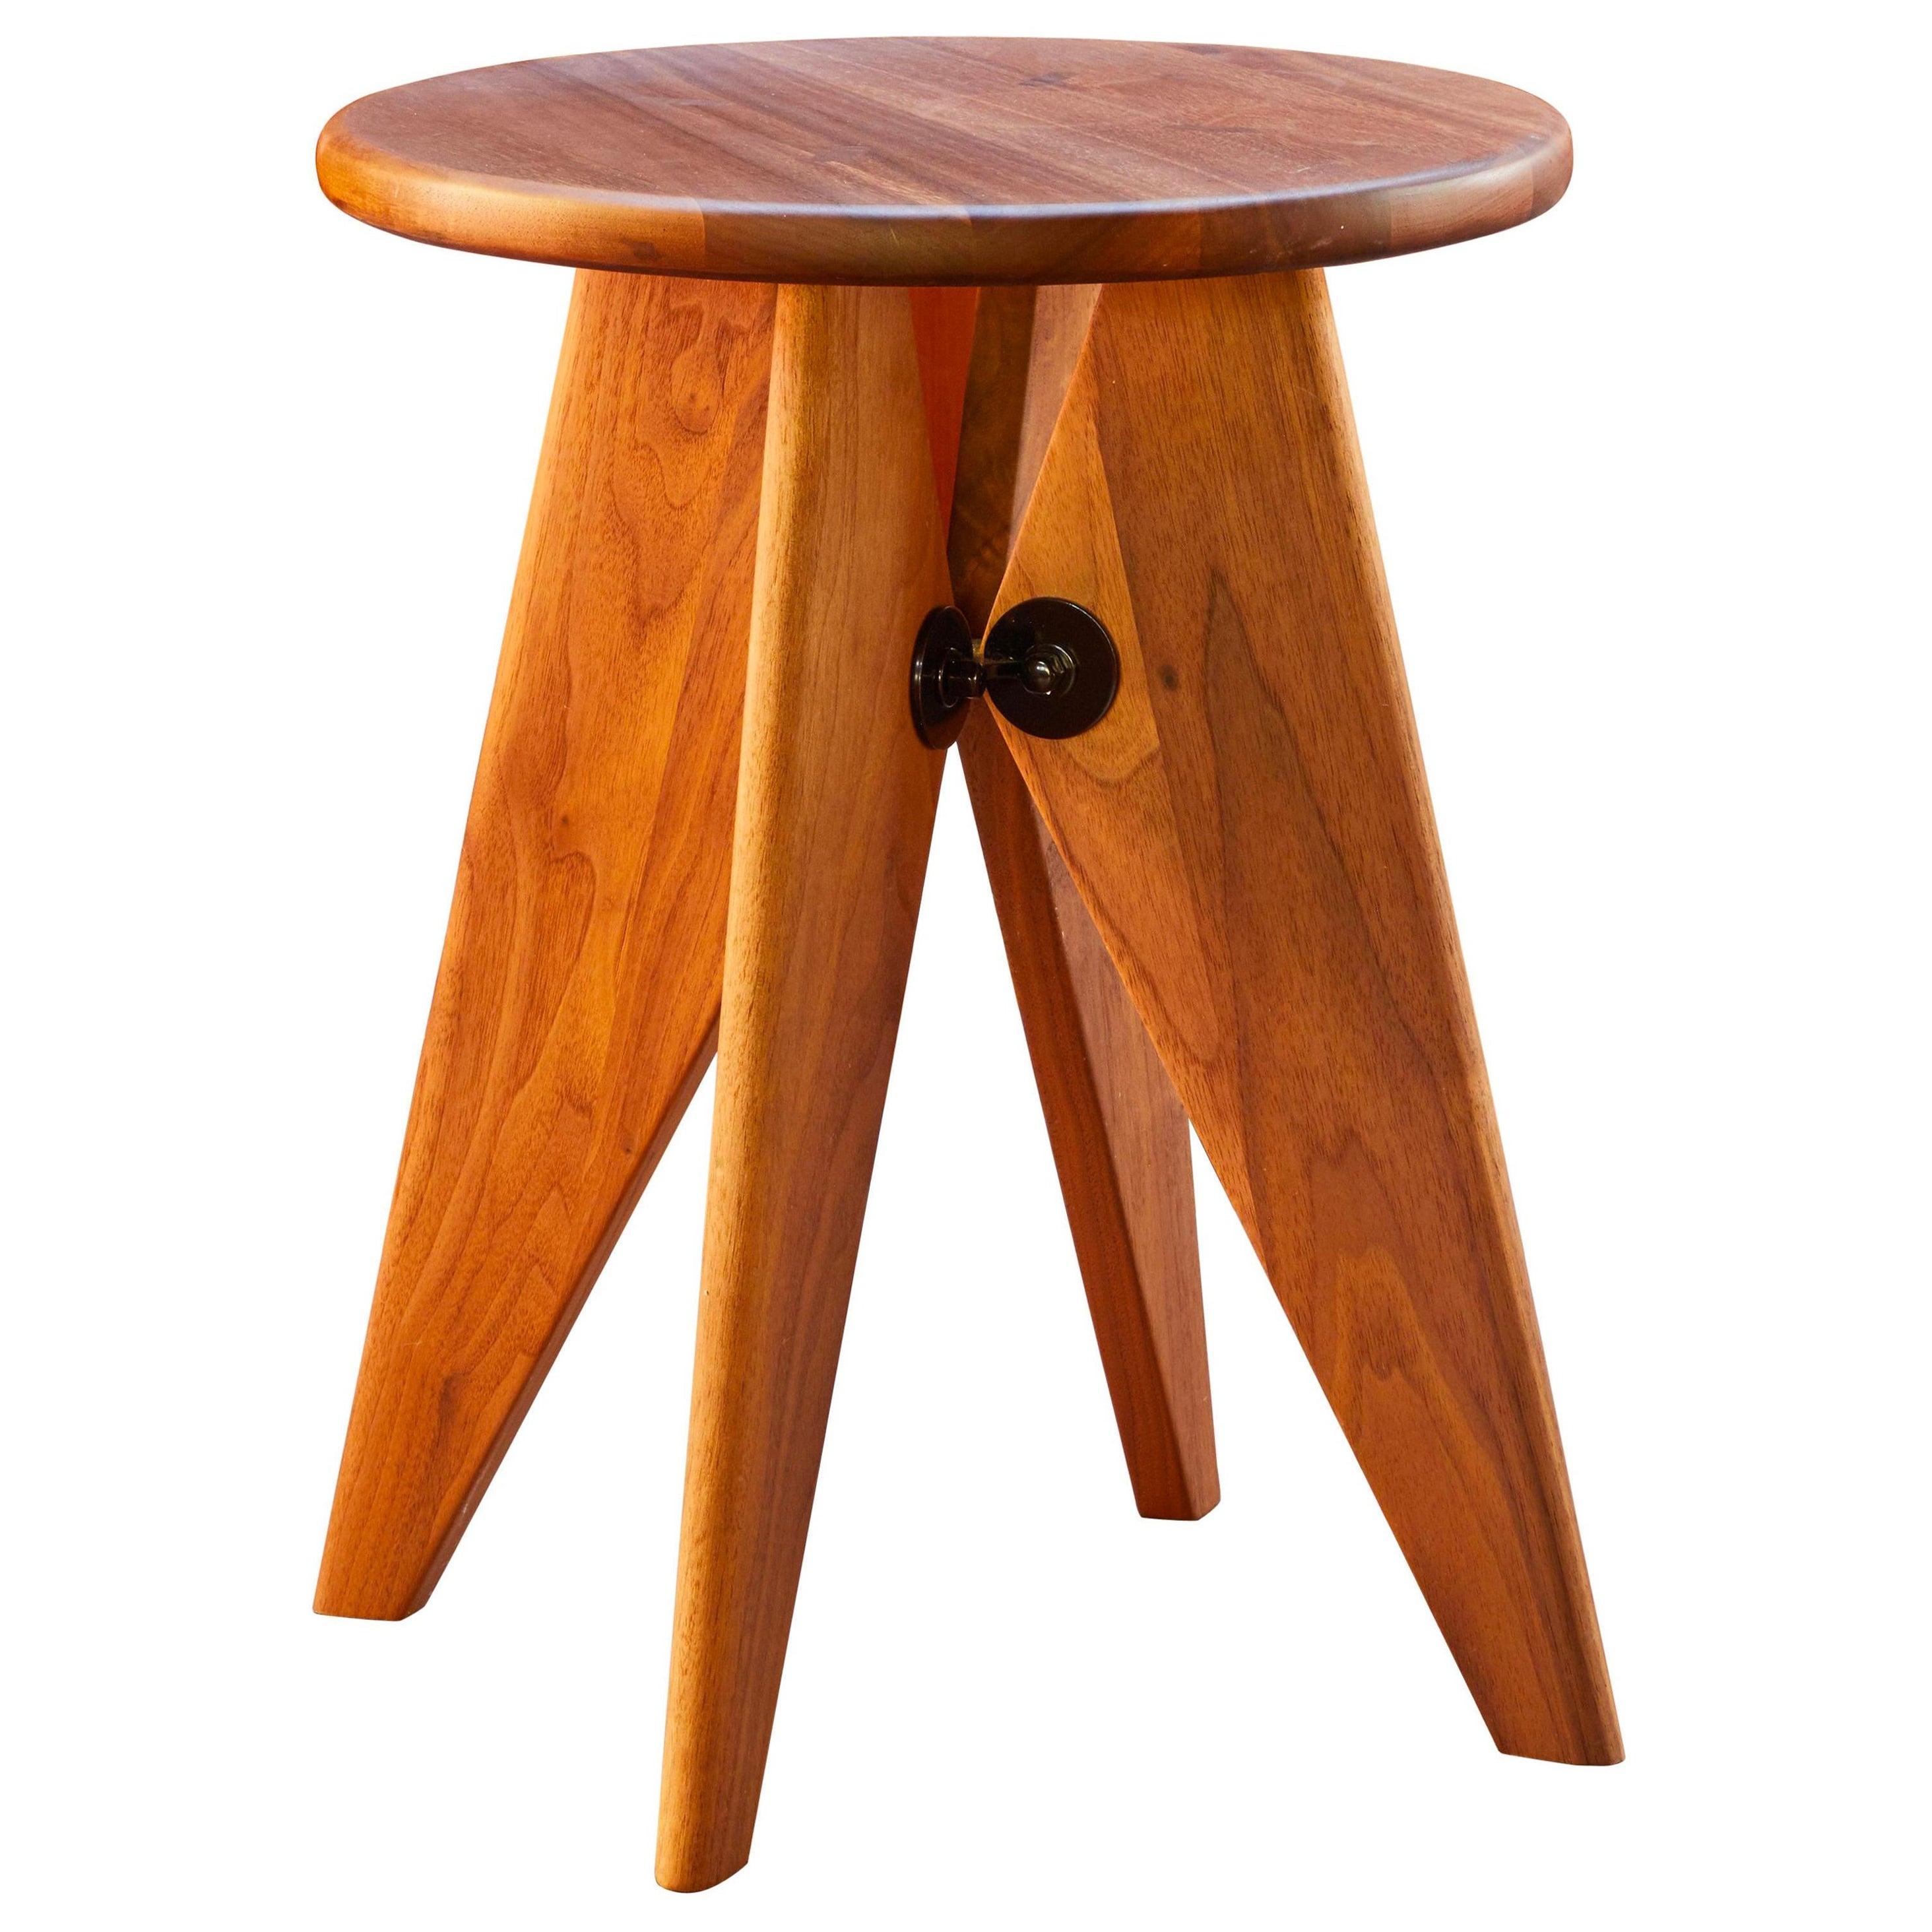 Jean Prouvé Tabouret Solvay Stools in American Walnut For Sale